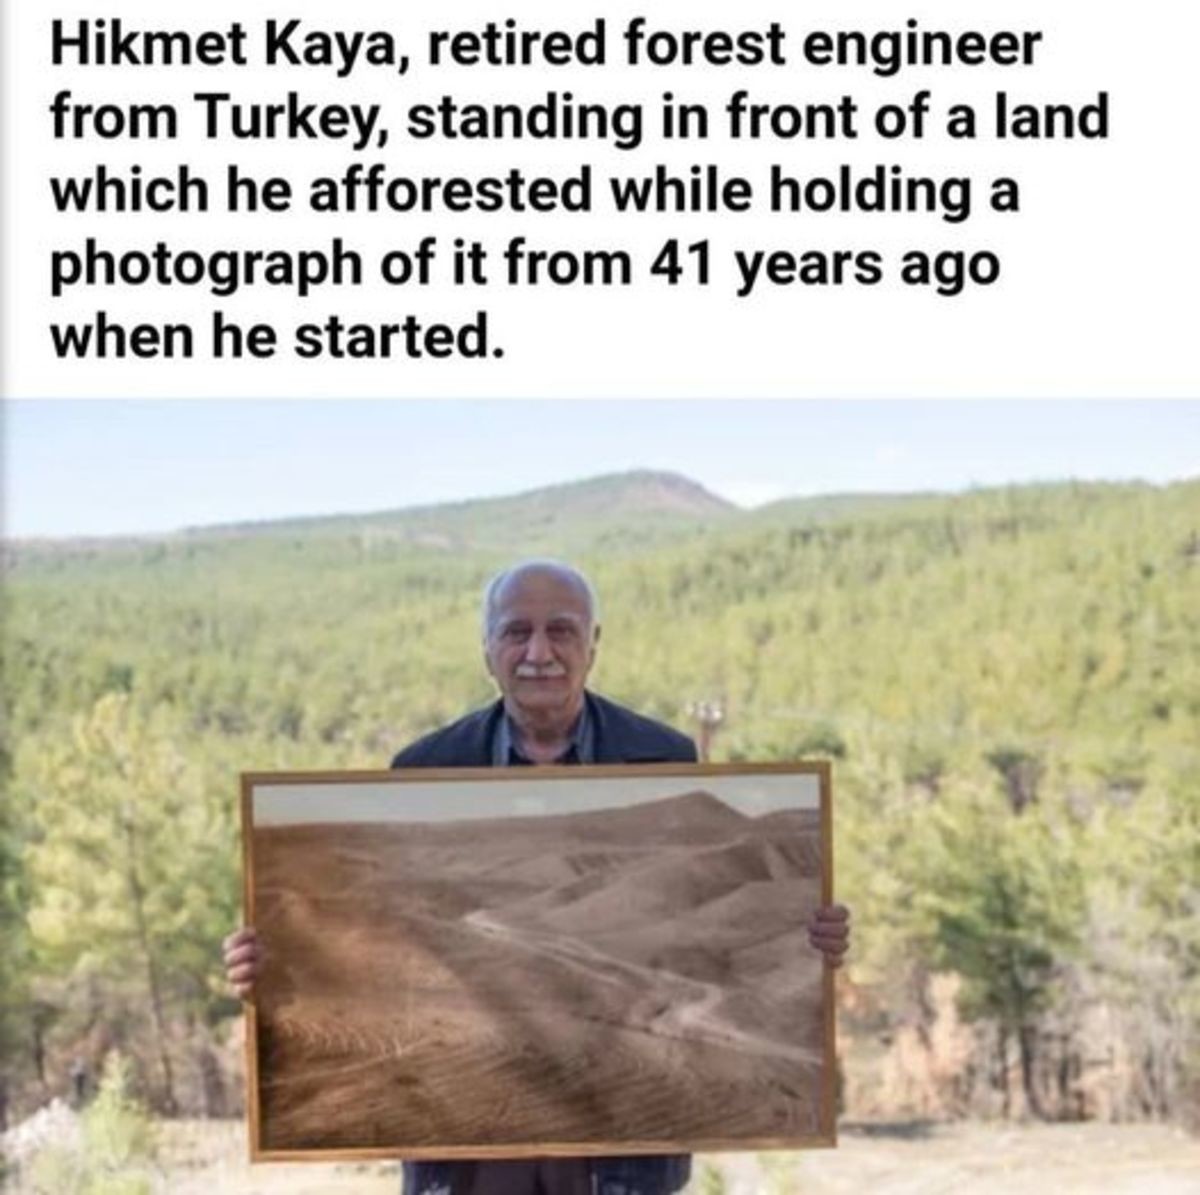 Forester. .. Hikmet loved his desert and as a child use to flock through the sand. Unfortunately, due to climate change enthusiasts and their unsubstantiated claims, Hikmet 